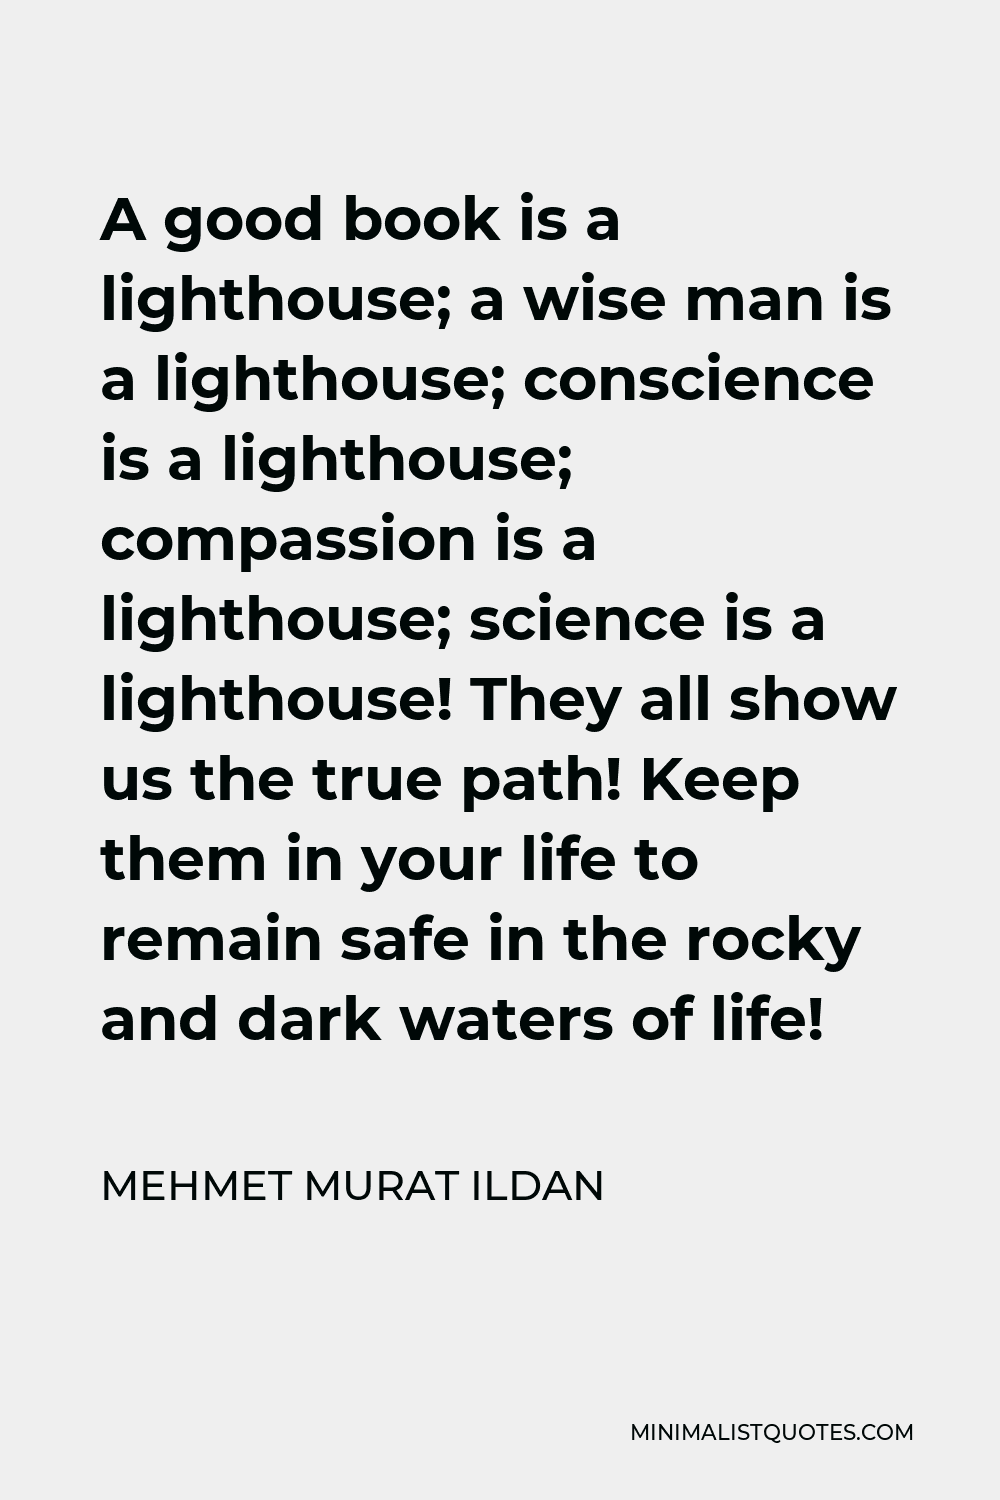 Mehmet Murat Ildan Quote - A good book is a lighthouse; a wise man is a lighthouse; conscience is a lighthouse; compassion is a lighthouse; science is a lighthouse! They all show us the true path! Keep them in your life to remain safe in the rocky and dark waters of life!